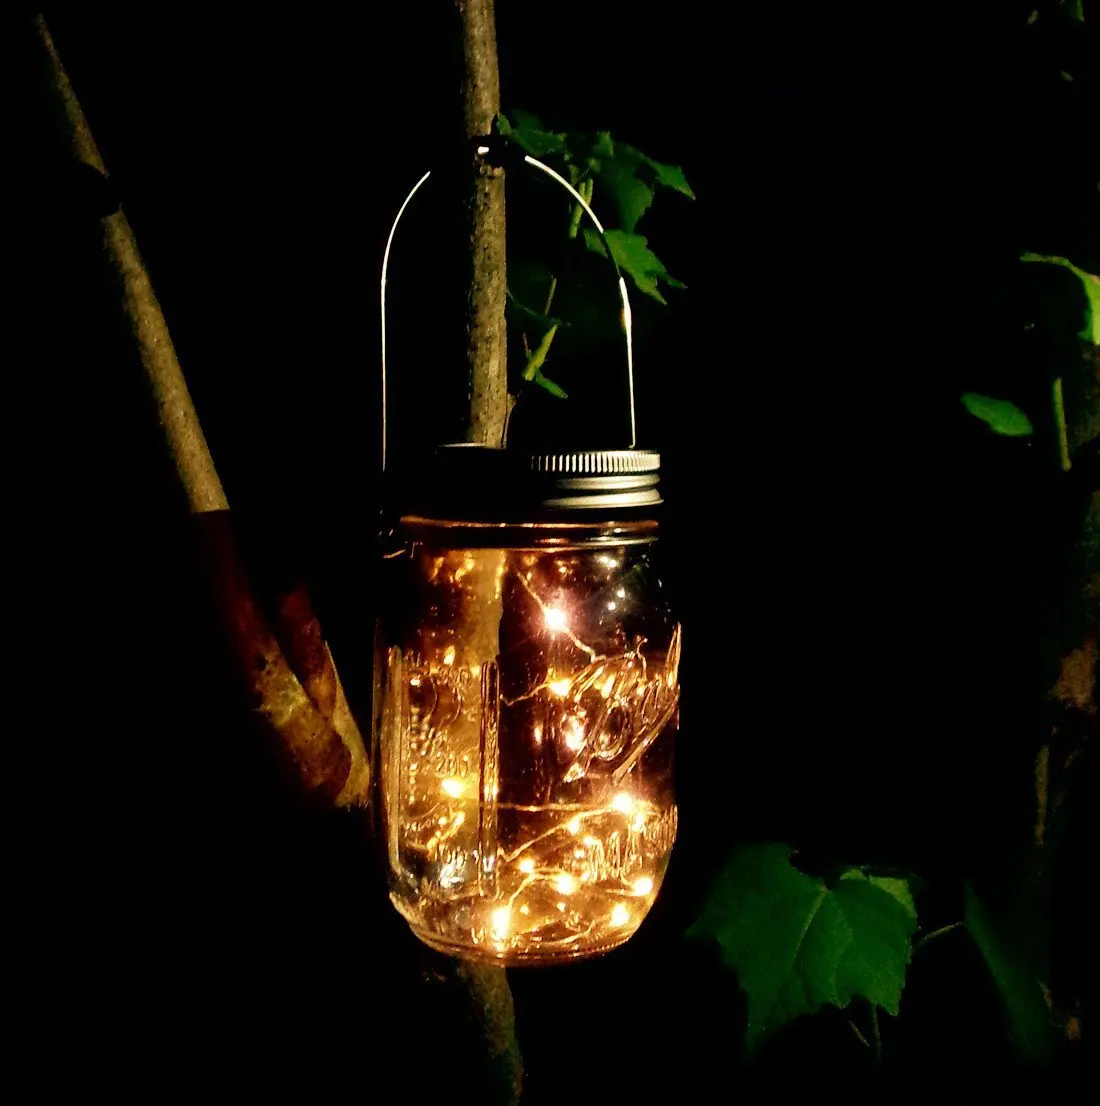 Ght string 20 leds fairy lights 2m solar lamp with battery christmas tree outdoor party thumb200